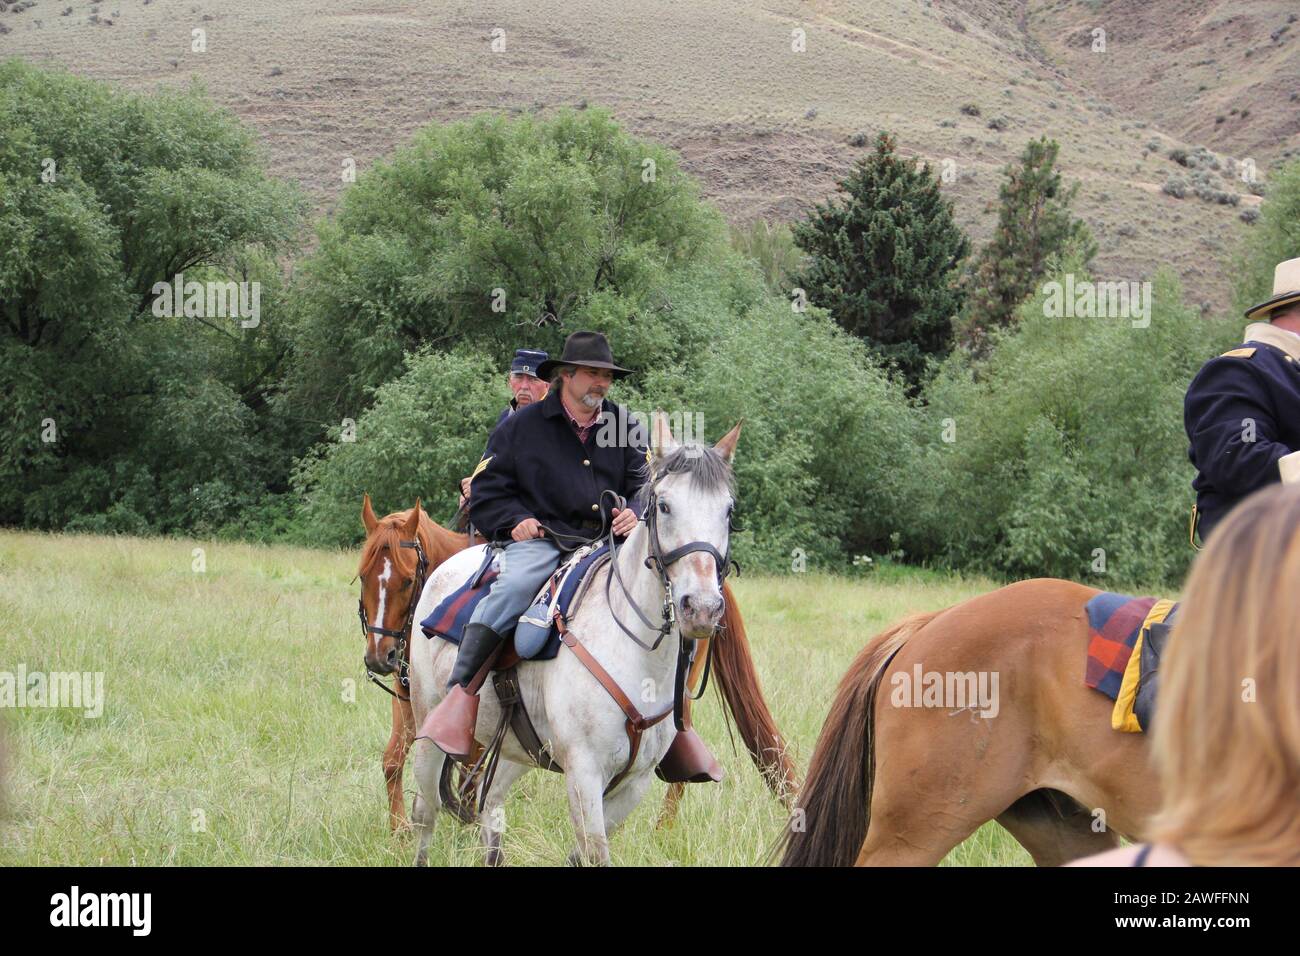 Union Gap, WA / USA - June 16, 2013:  The largest Civil War Reenactment in Washington State takes place in the Yakima Valley on a hot summer day. Stock Photo